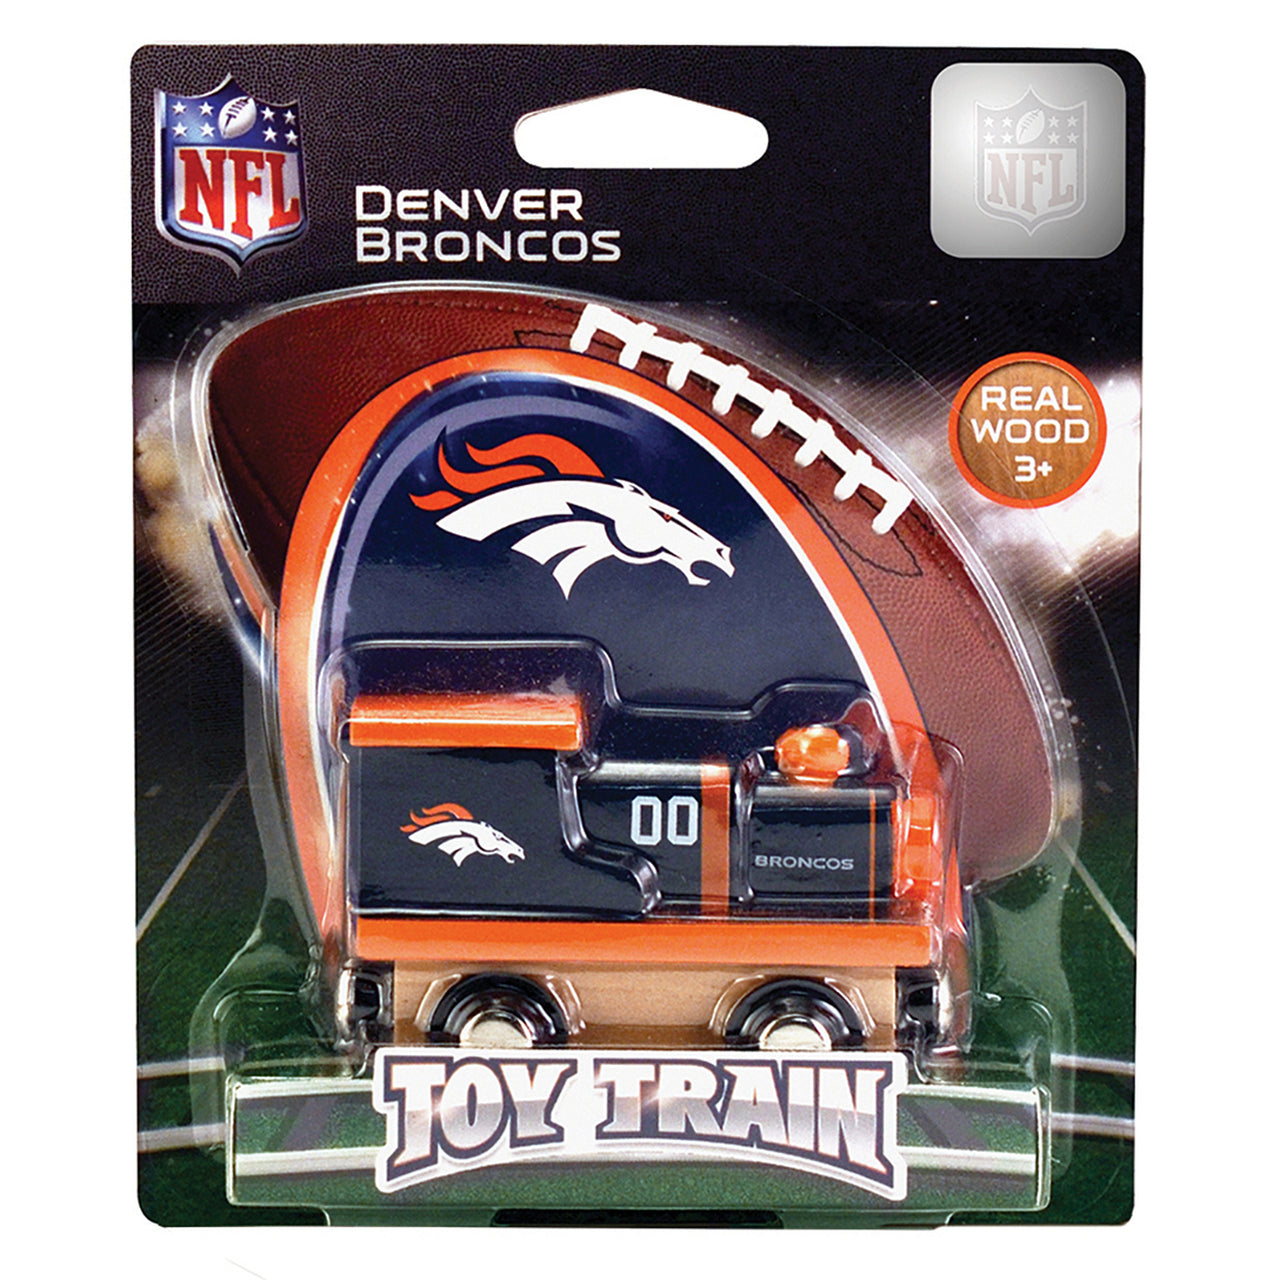 Denver Broncos Wooden Toy Train Engine by Masterpieces